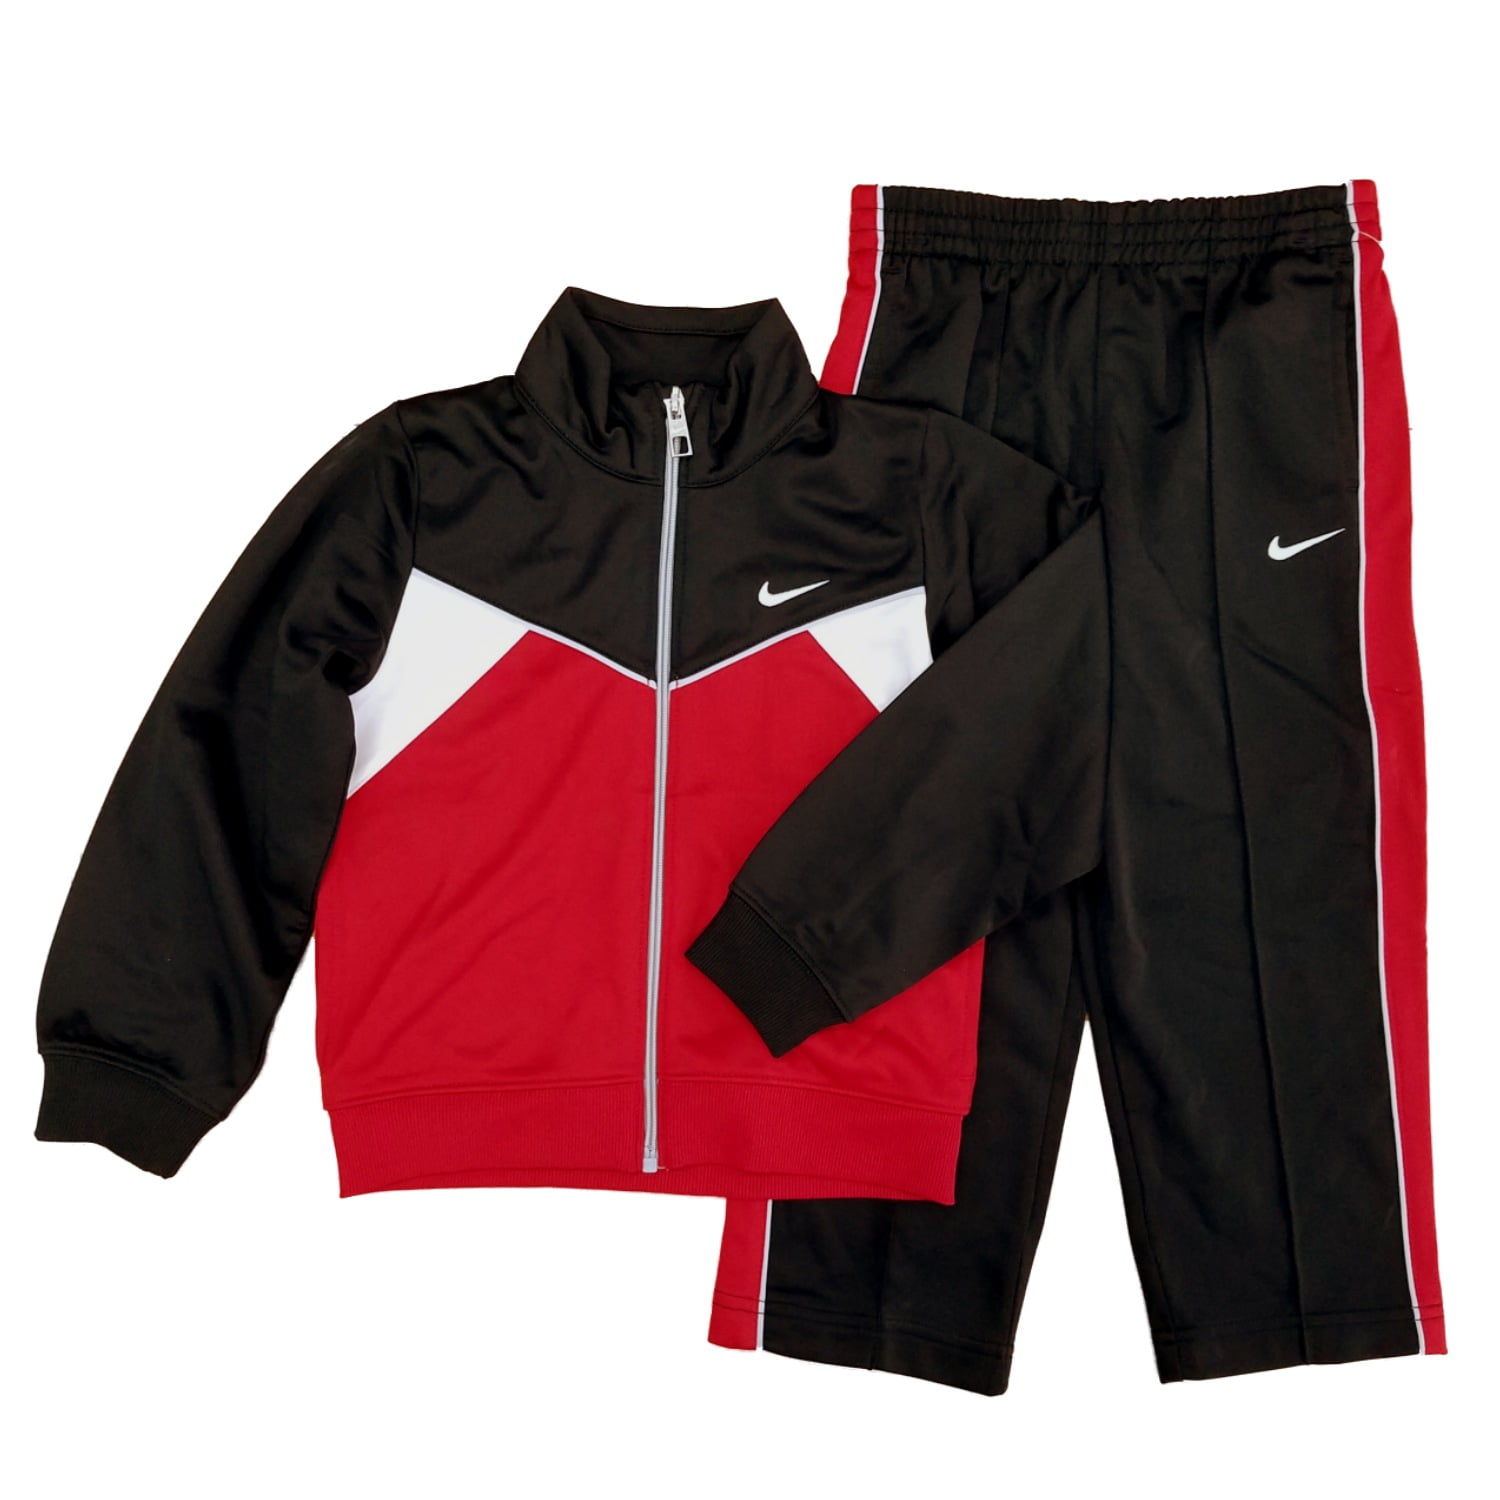 nike sweatsuit red and black